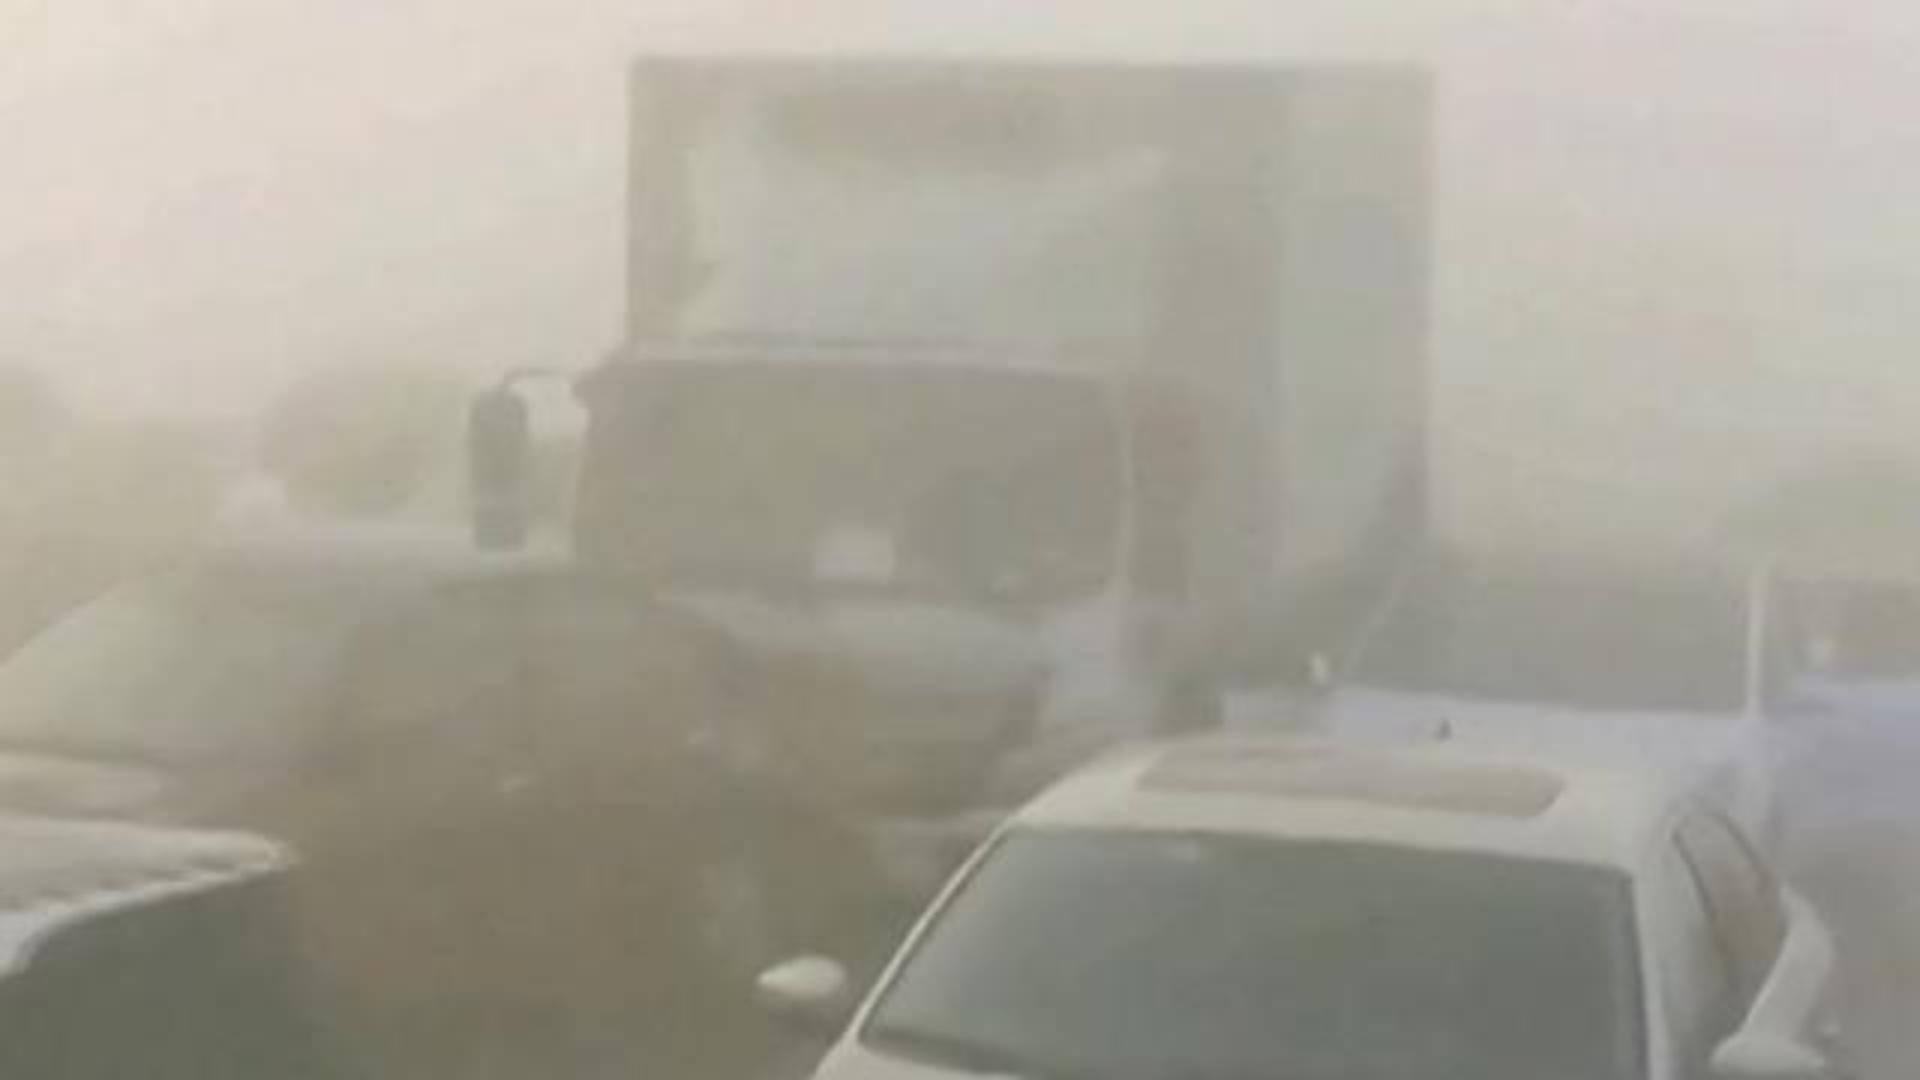 Nearly 300-car pileup on foggy Chinese bridge leaves one dead